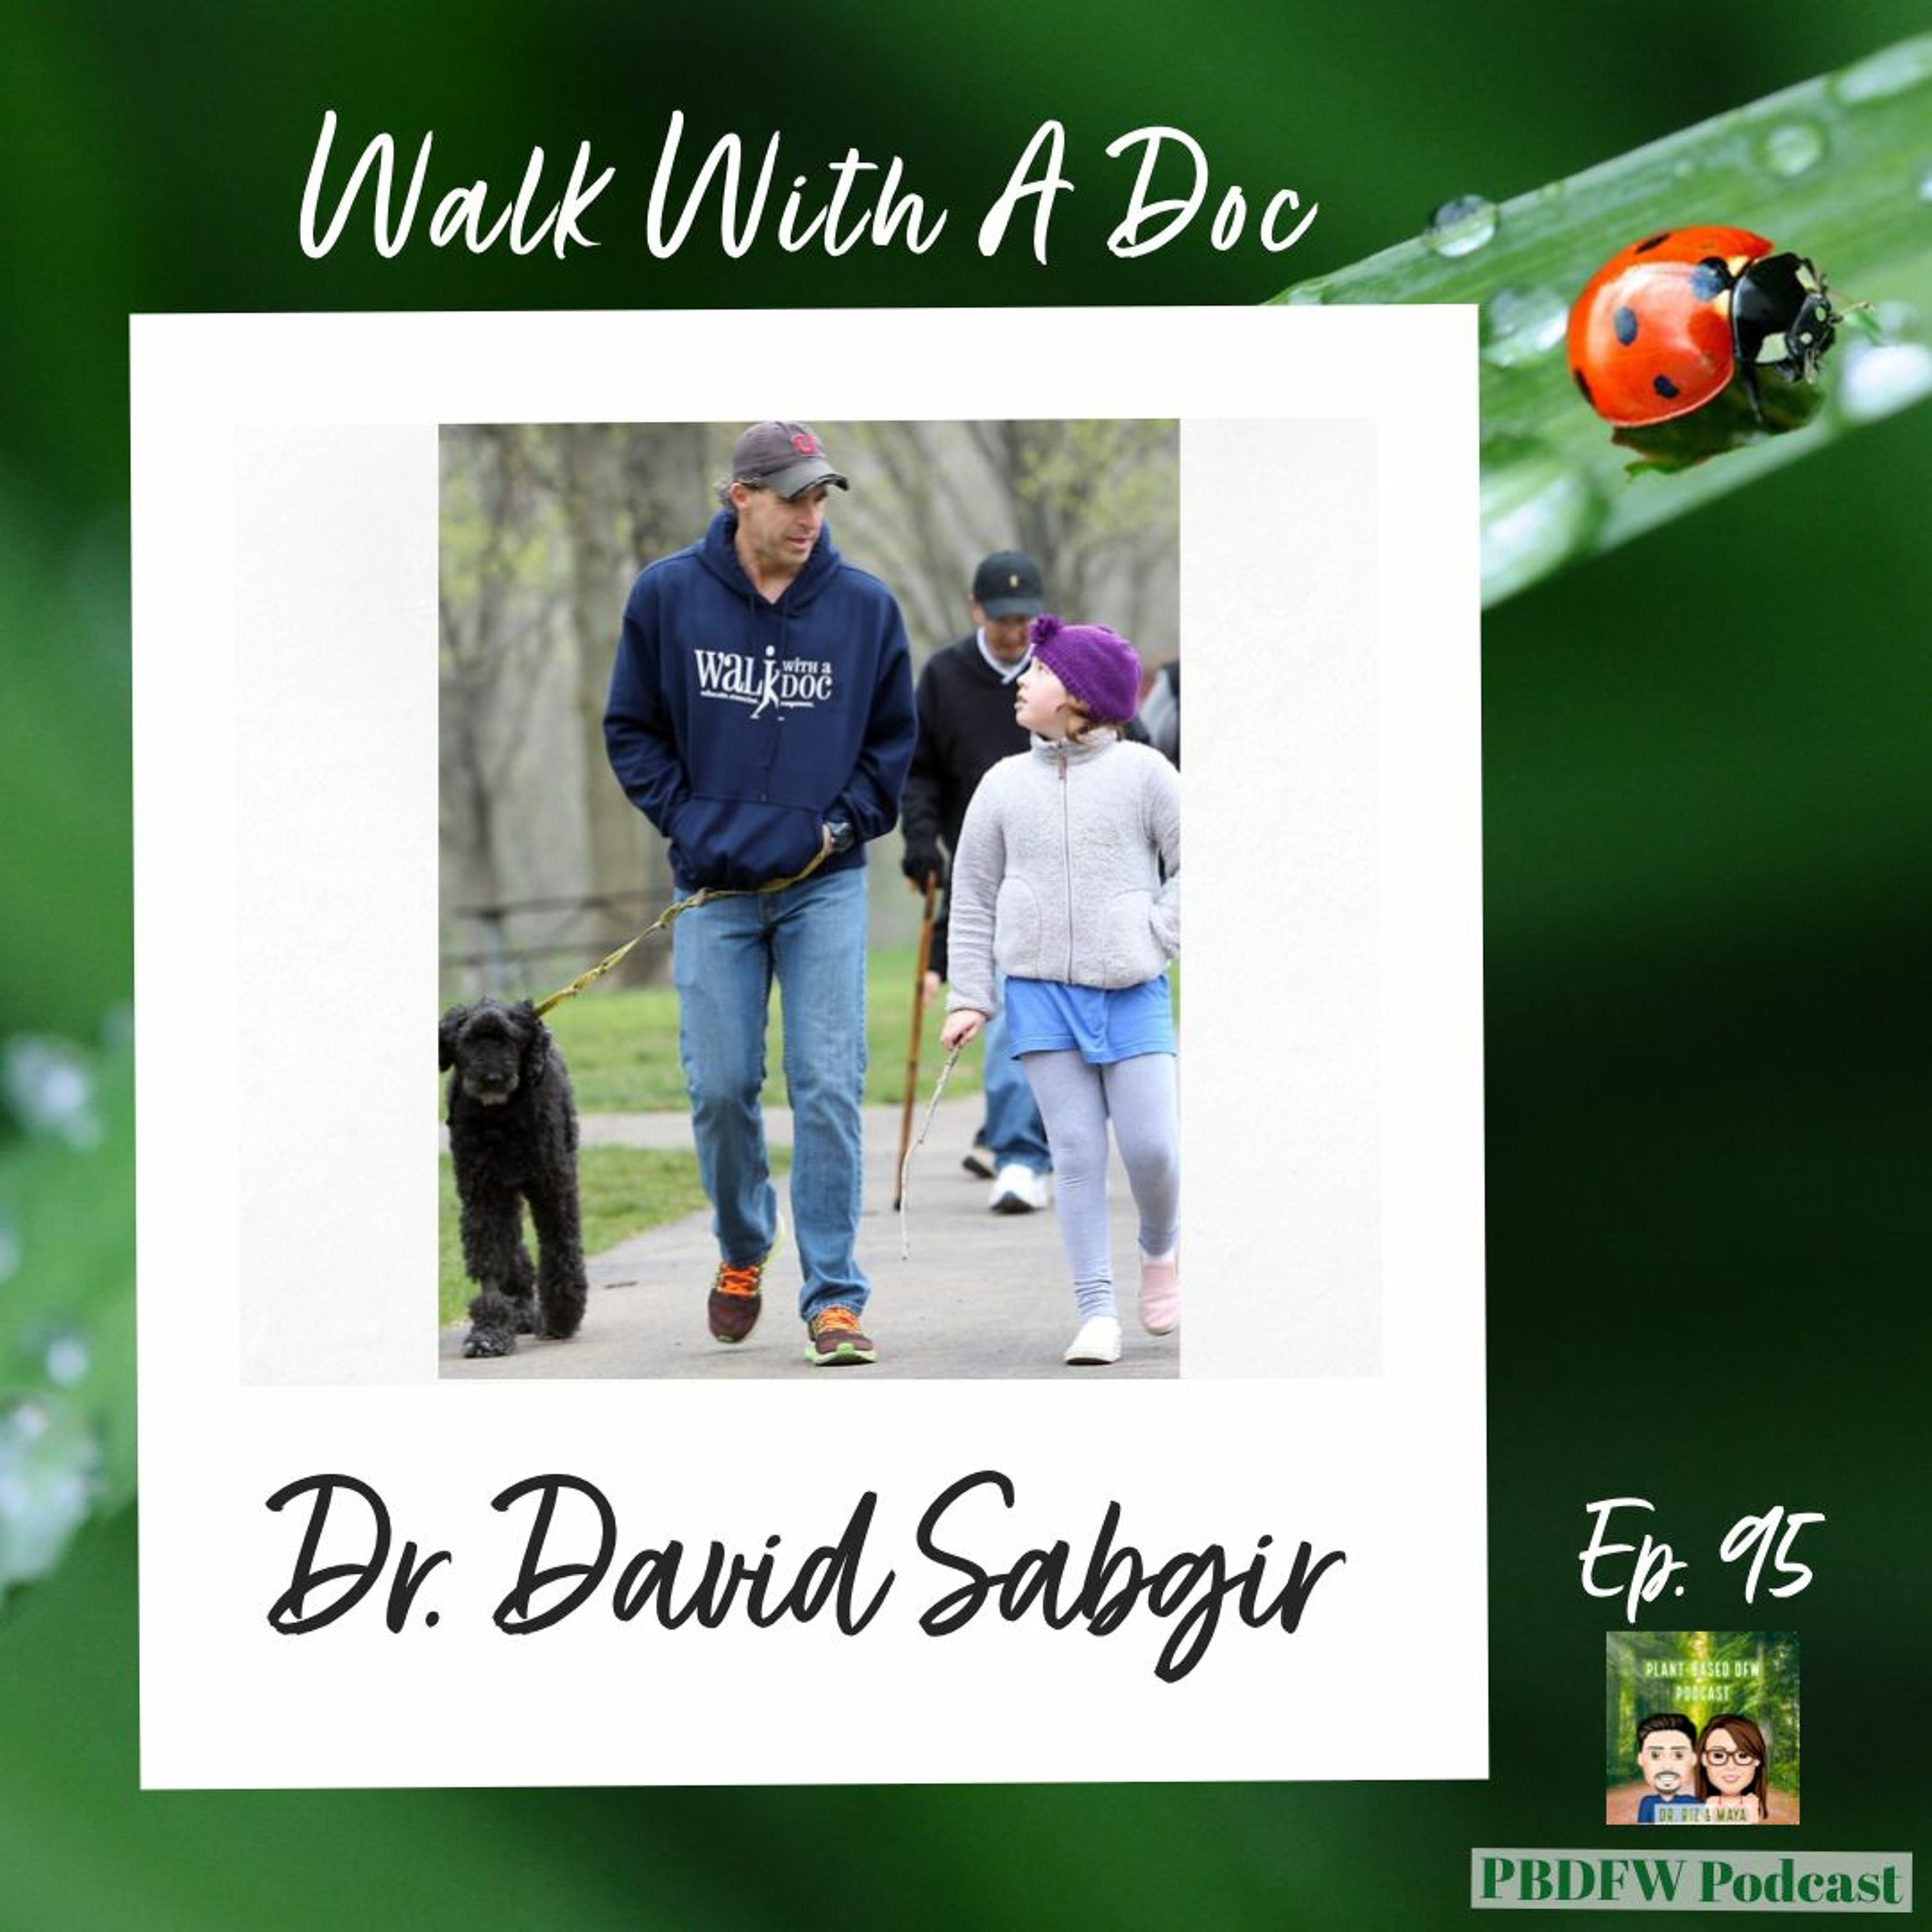 95: Walk to A Prevent Heart Attack, Cardiologist Dr. David Sabgir | Walk With A Doc Image